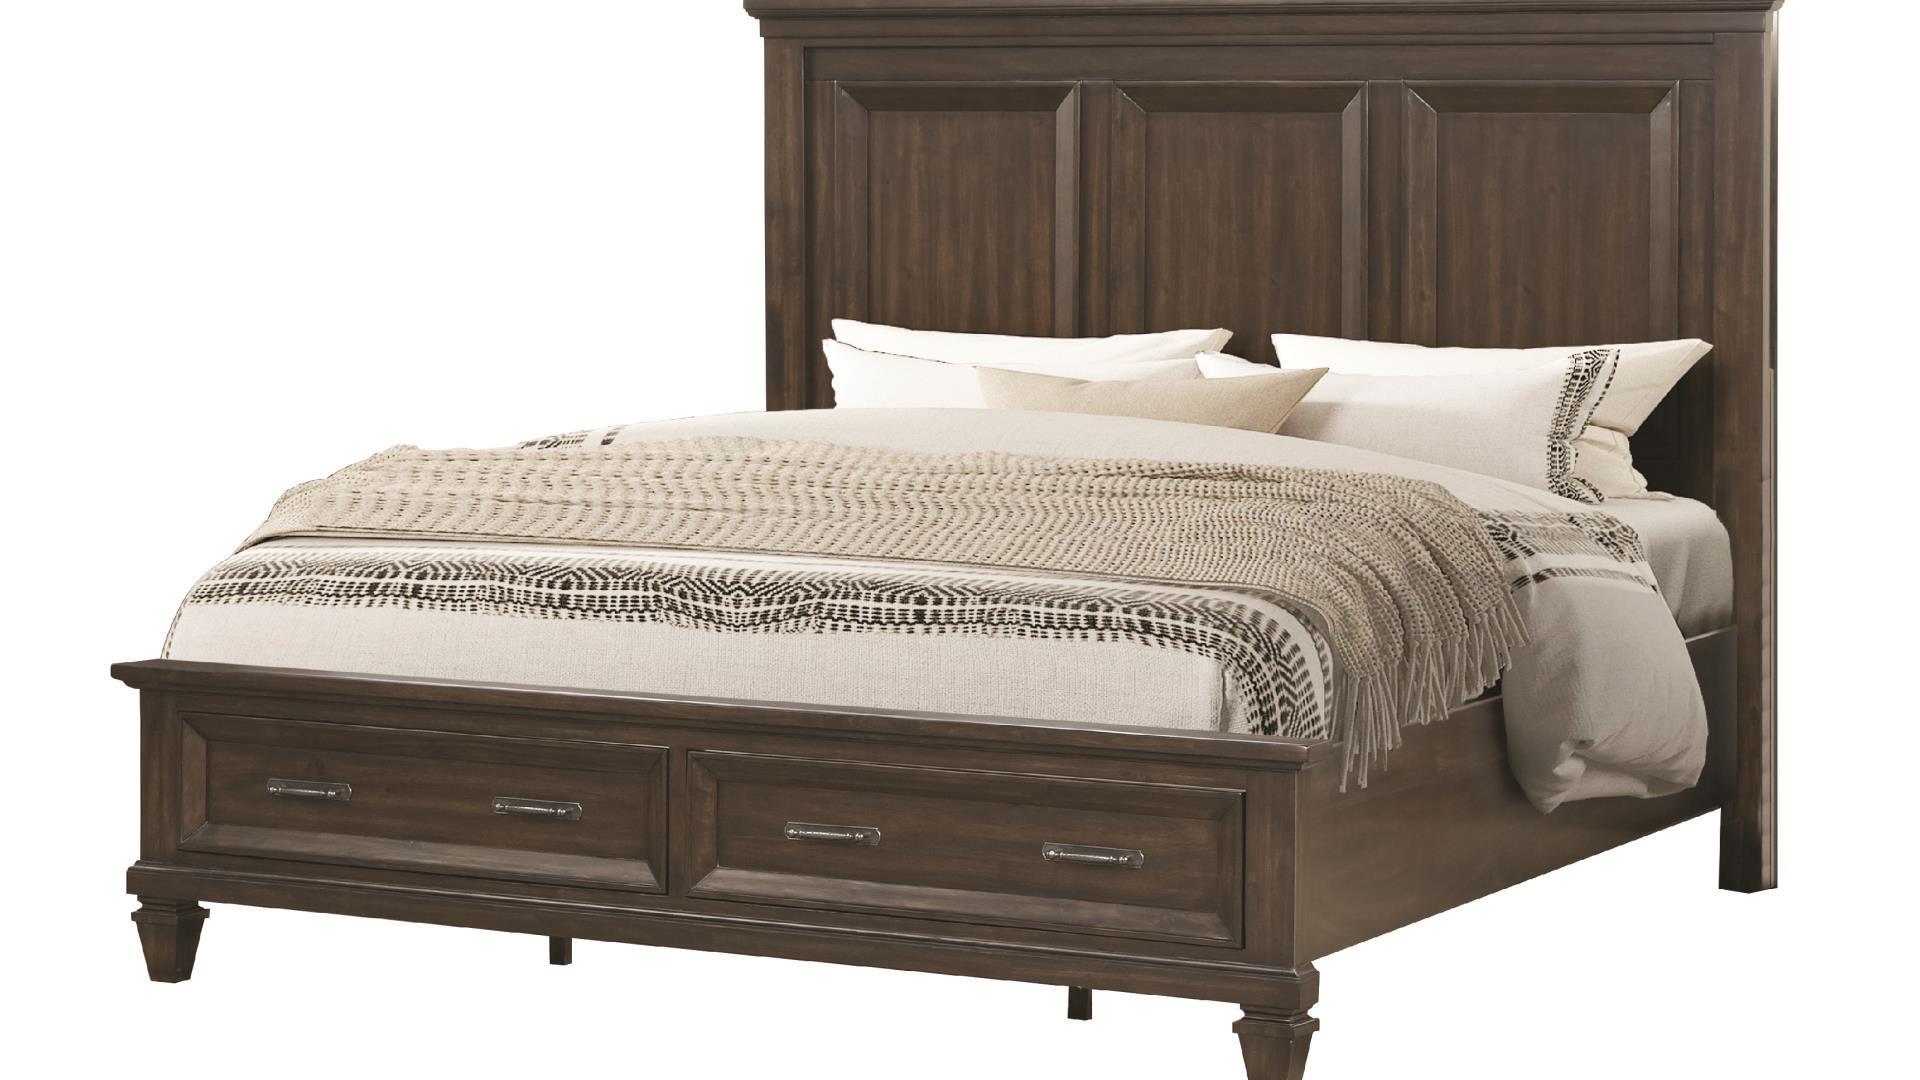 

    
Walnut Solid Wood Storage Queen Bed HAMILTON Galaxy Home Classic Traditional
